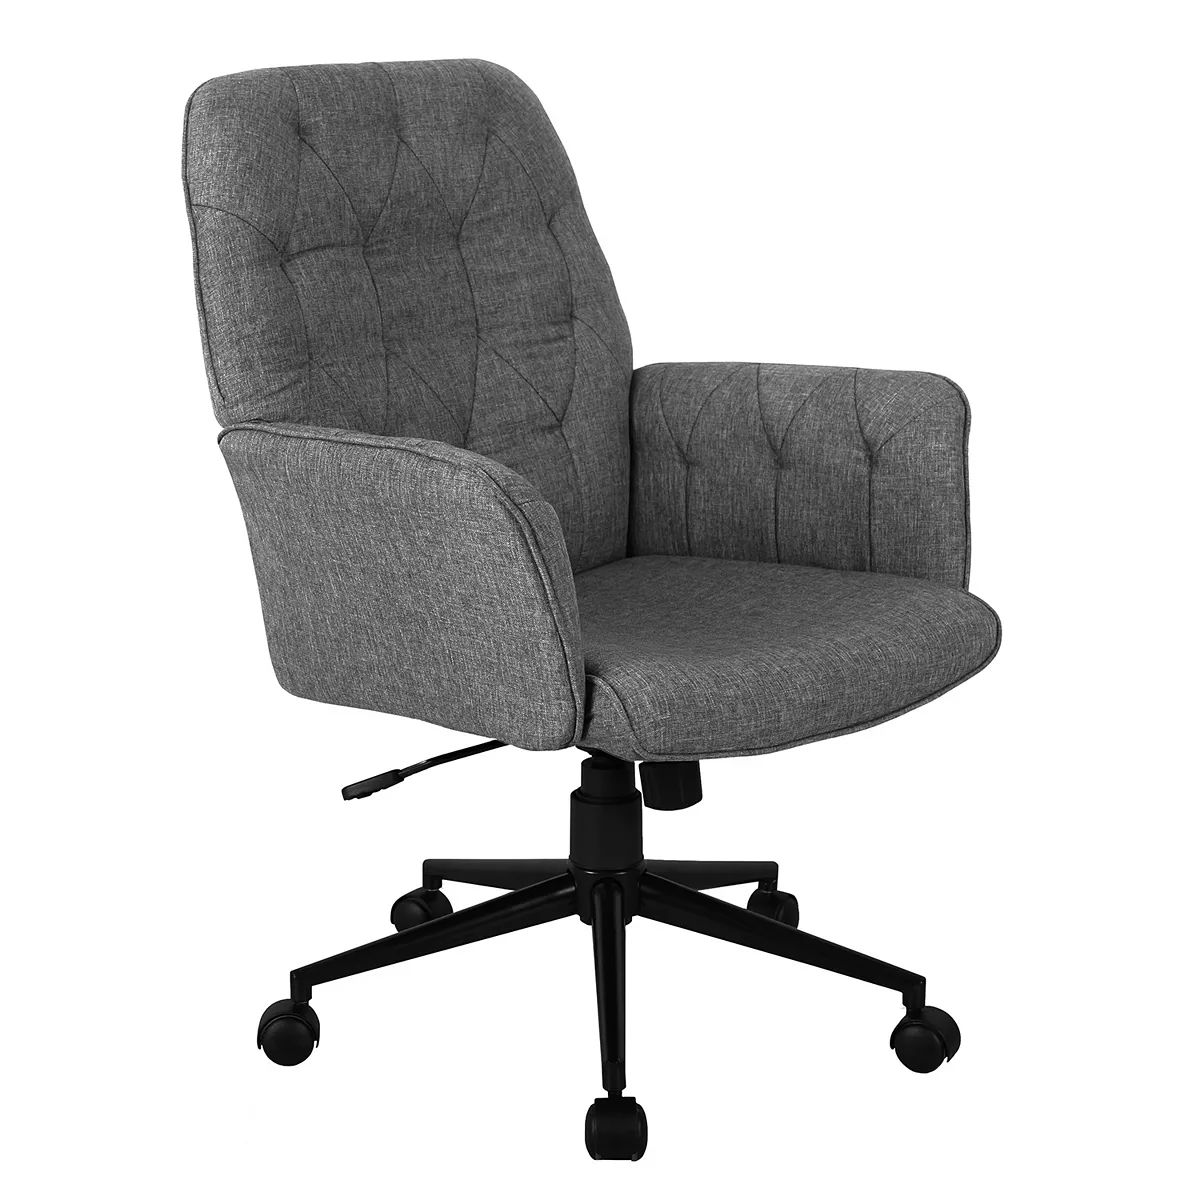 Techni Mobili Modern Upholstered Tufted Office Chair with Arms | Kohl's